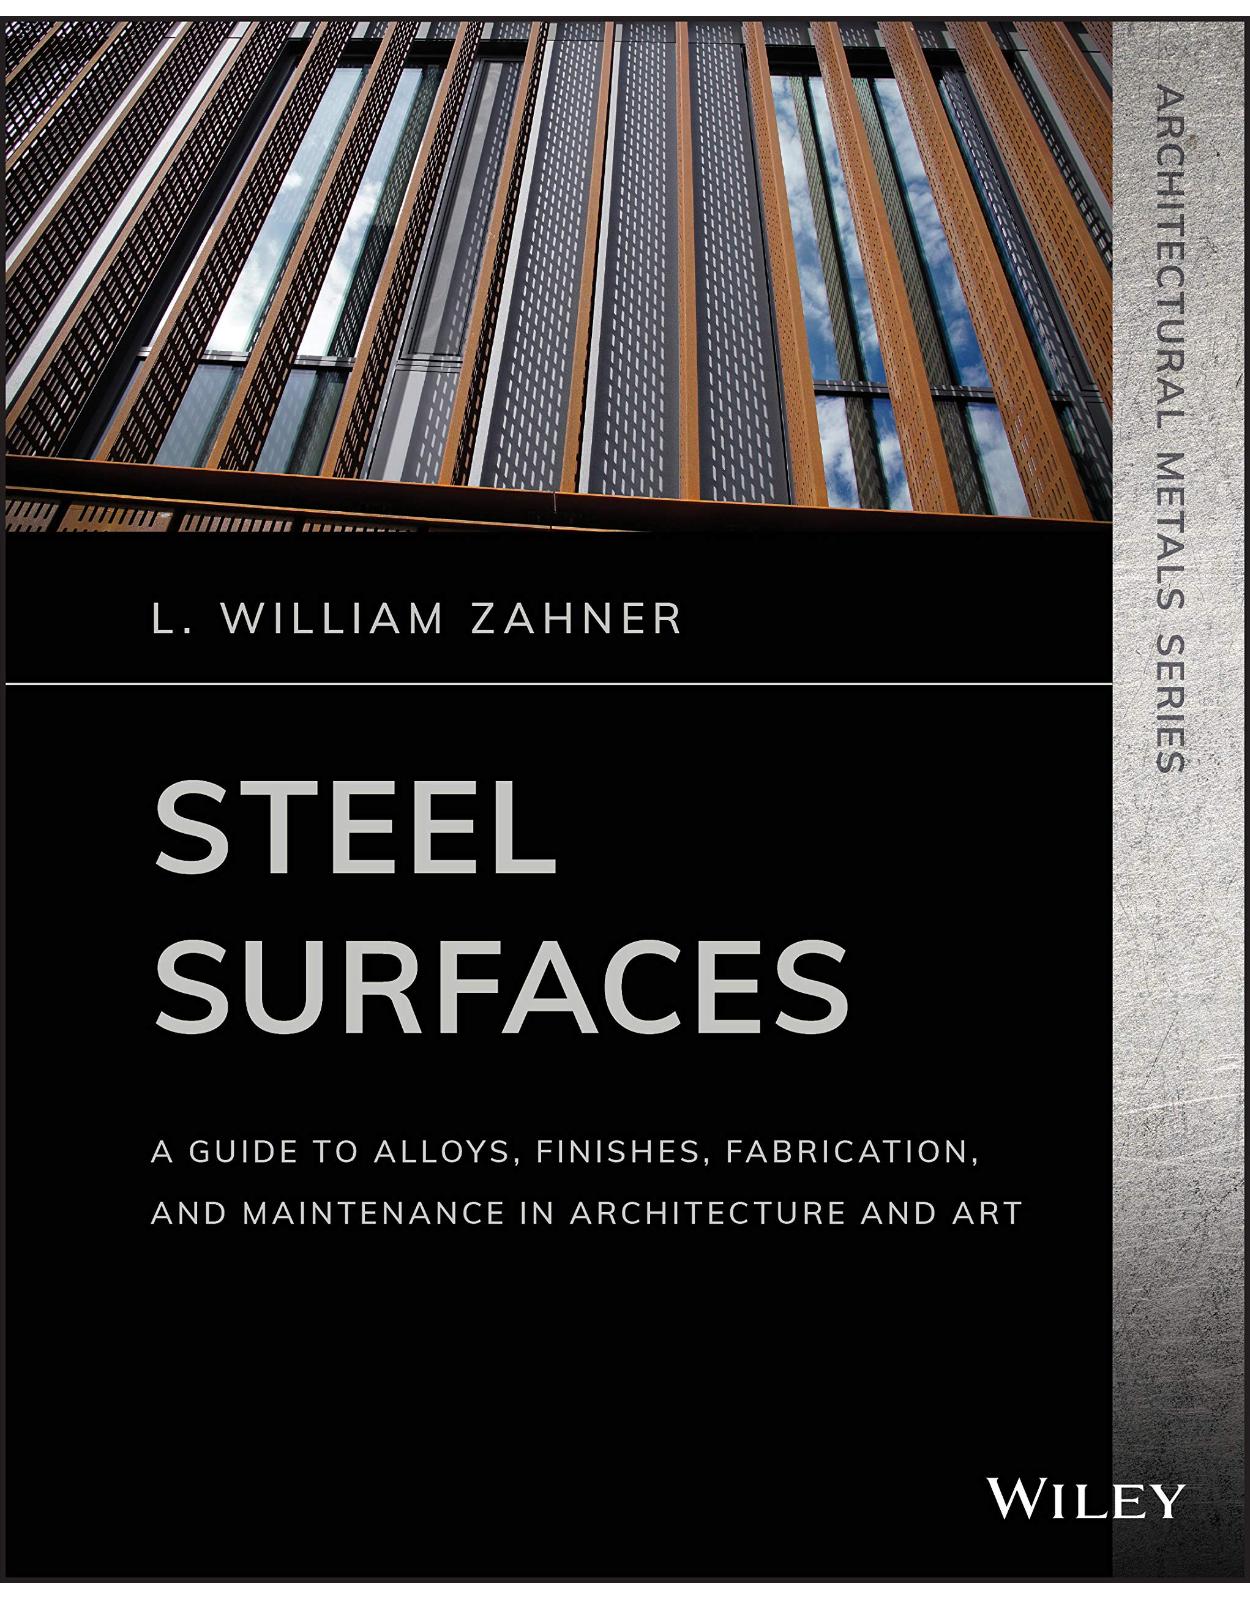 Steel Surfaces: A Guide to Alloys, Finishes, Fabrication, and Maintenance in Architecture and Art (Architectural Metals Series)